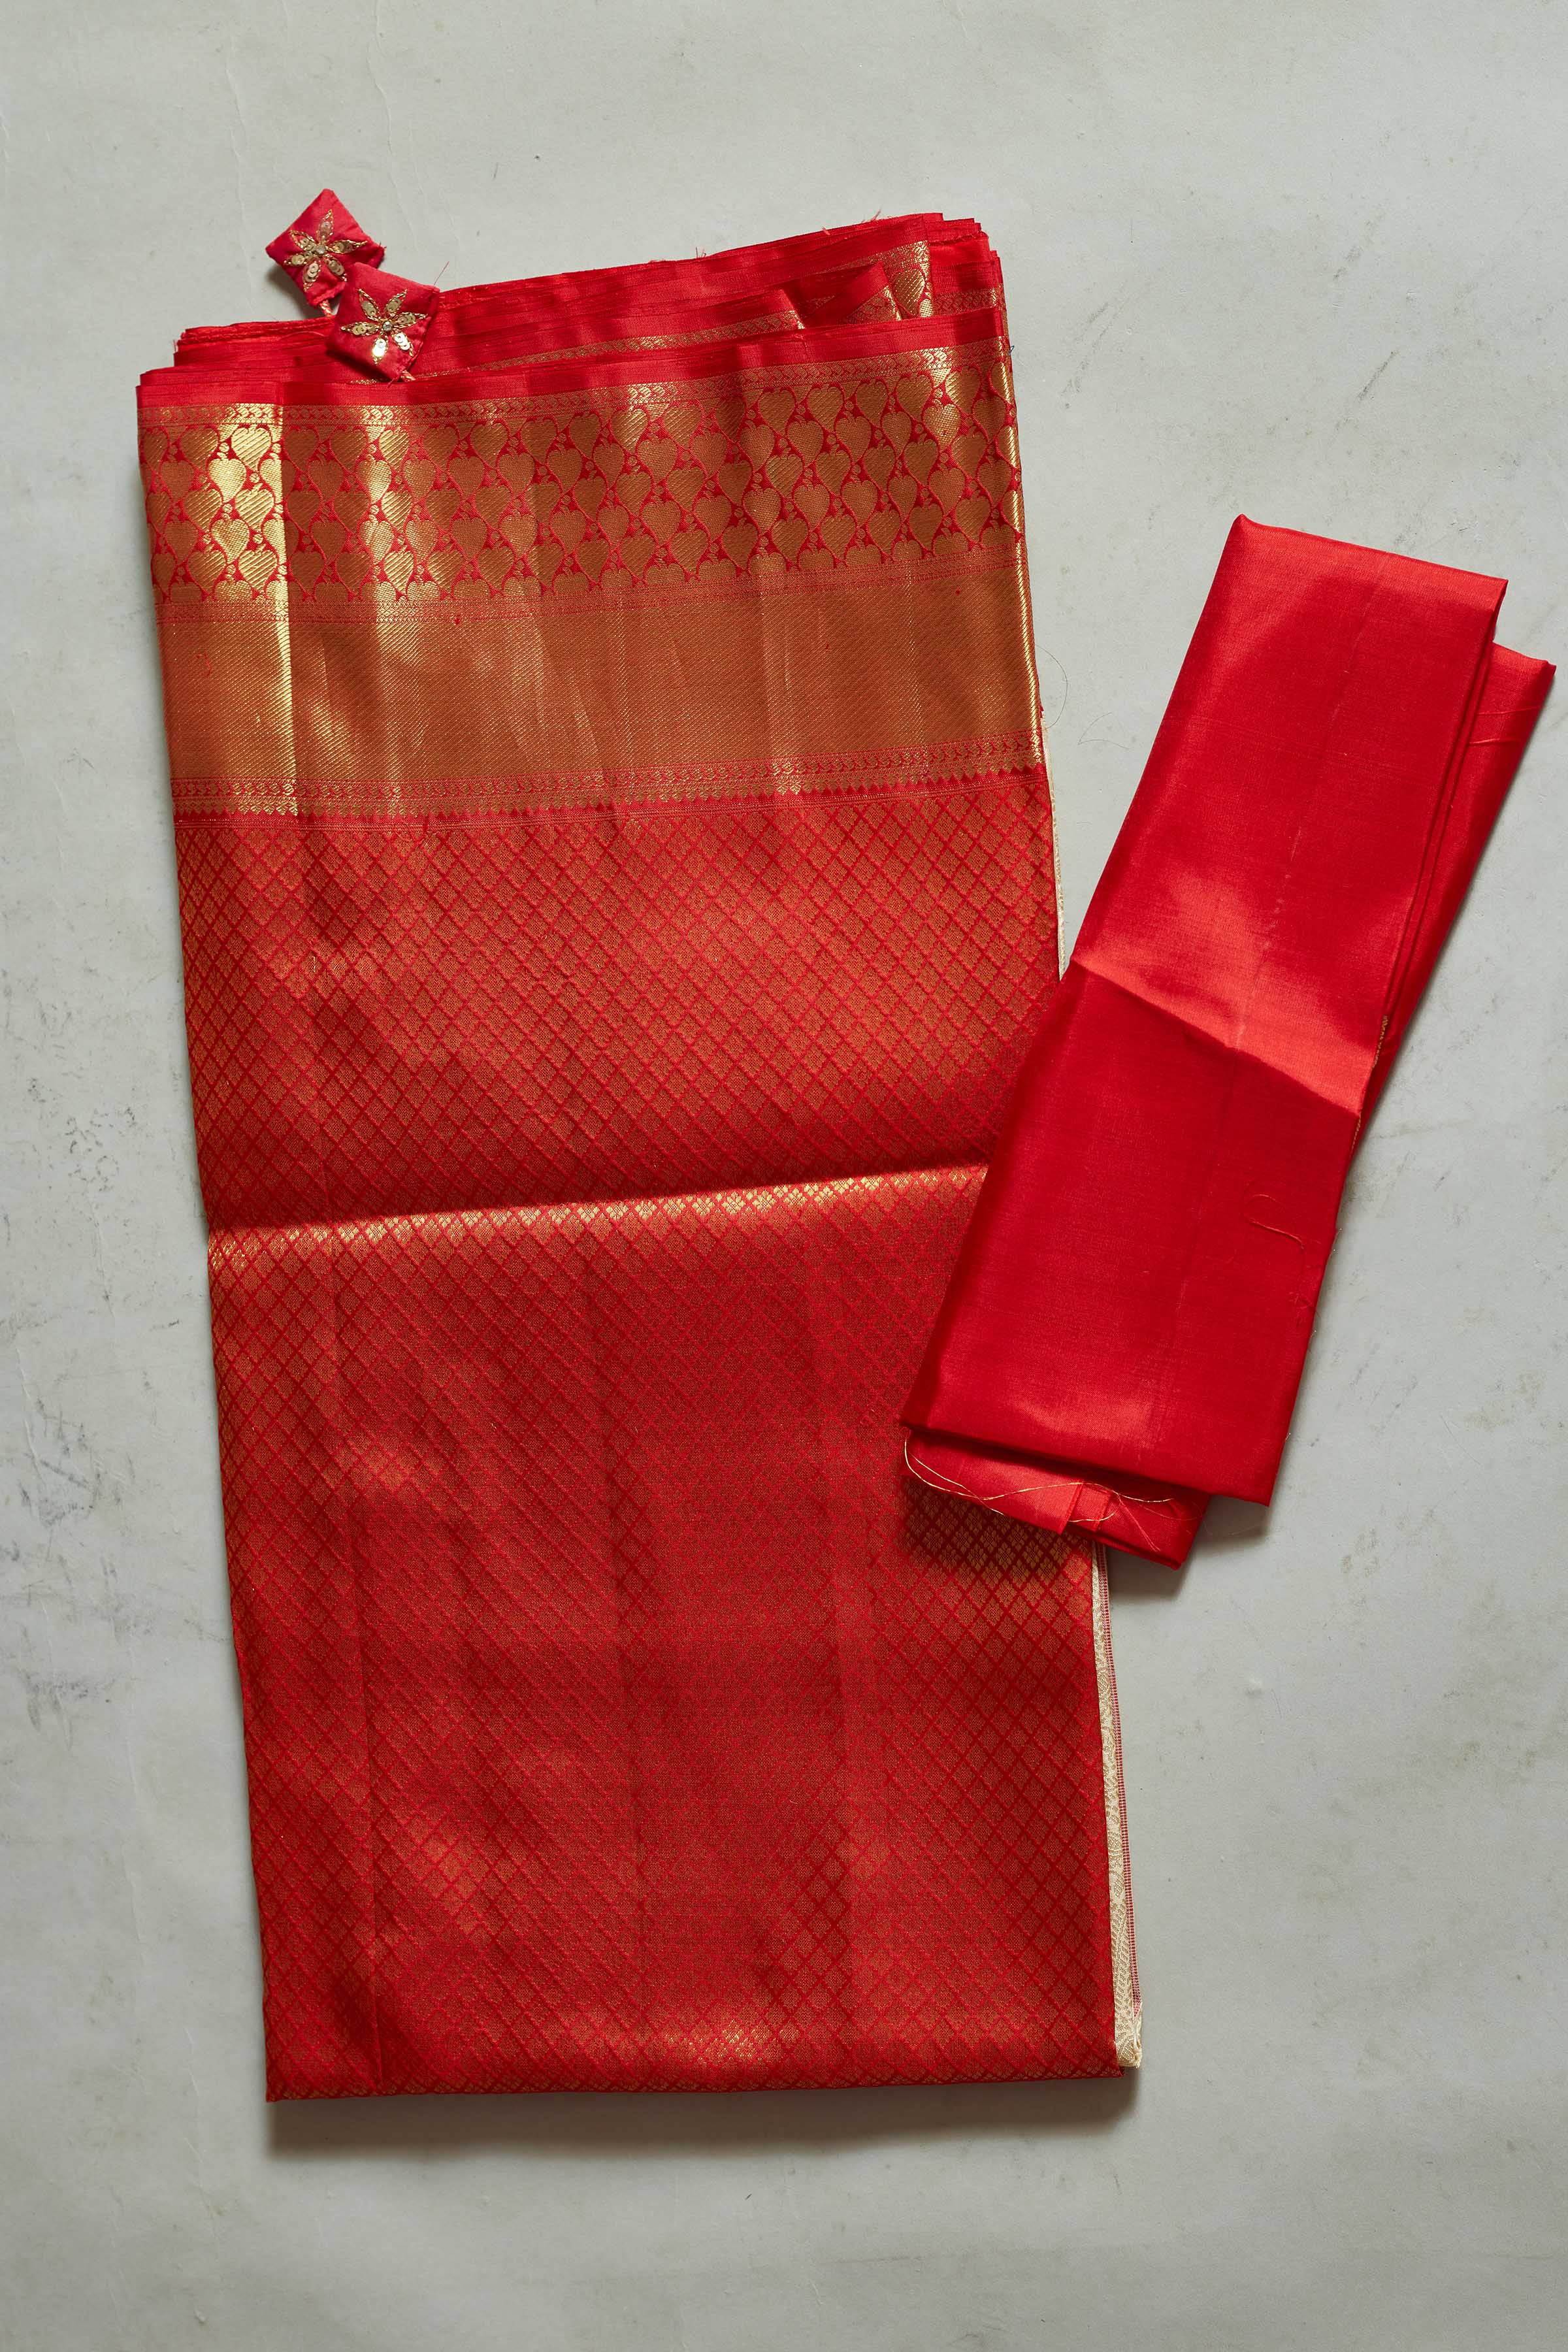 Shop cream Kanjivaram silk saree online in USA with red zari border. Look your best on festive occasions in latest designer sarees, pure silk sarees, Kanjivaram silk saris, handwoven saris, tussar silk sarees, embroidered saris from Pure Elegance Indian clothing store in USA.-blouse